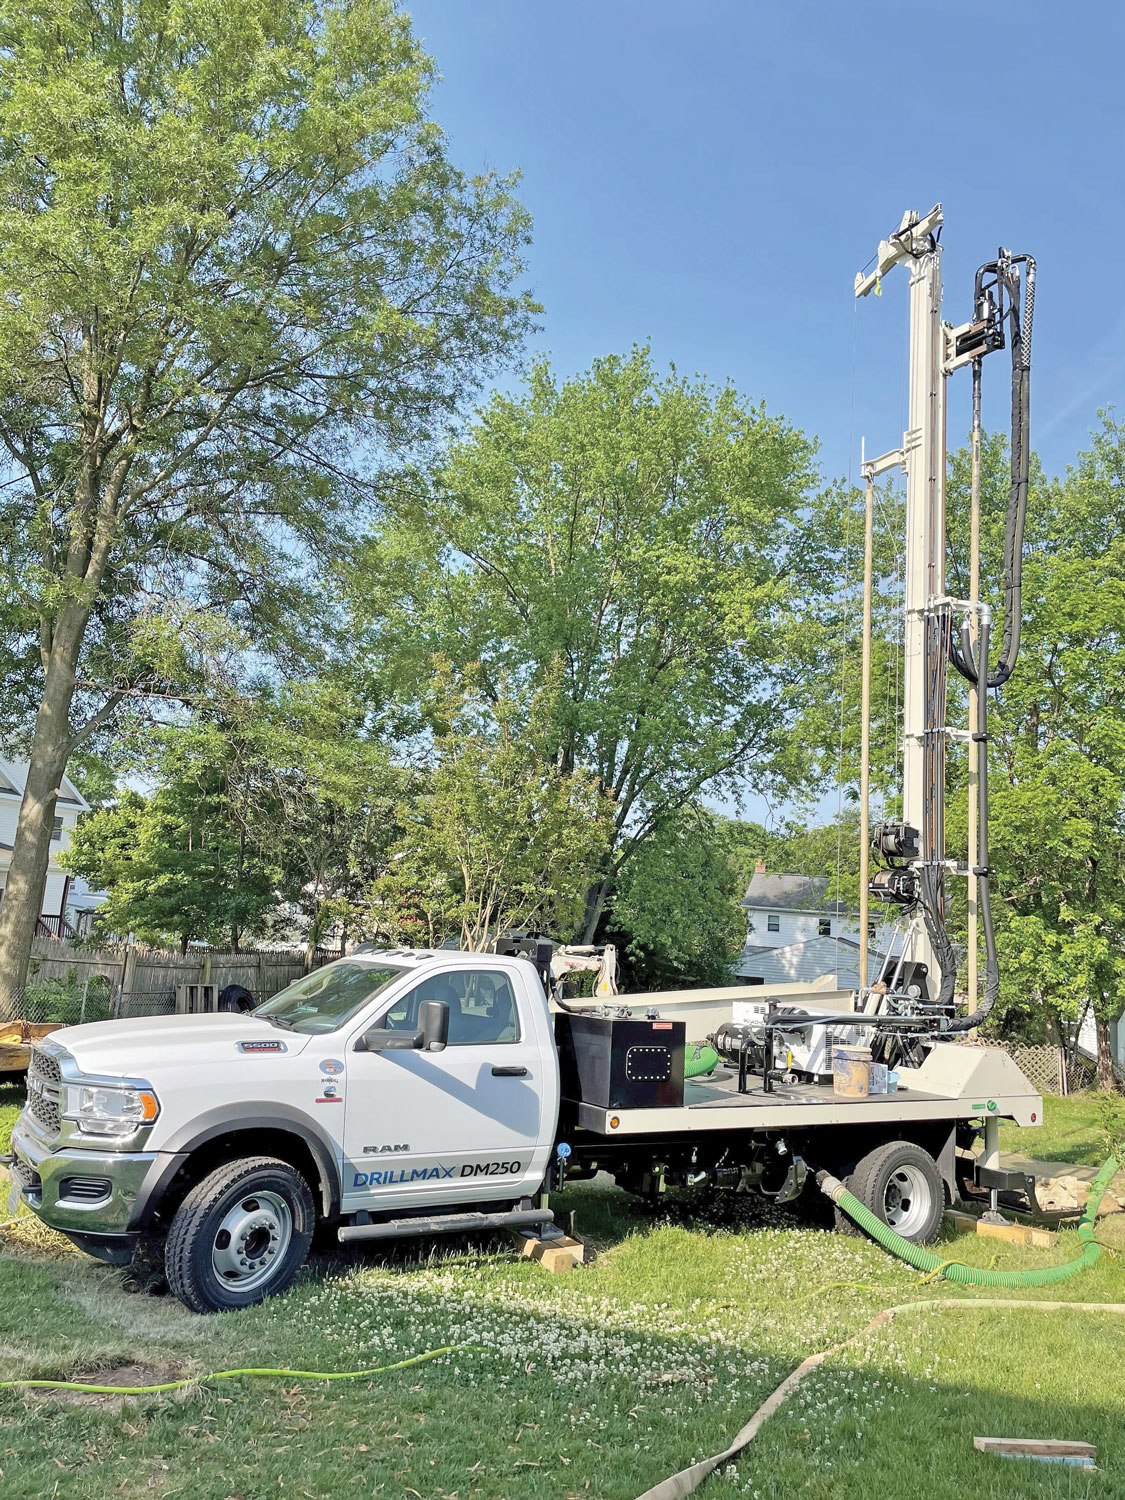 Purchased for its mud rotary capabilities, the DM250 performs air rotary drilling rock wells in palm-sized cobbles using an auxiliary air compressor for the air rotary drilling.